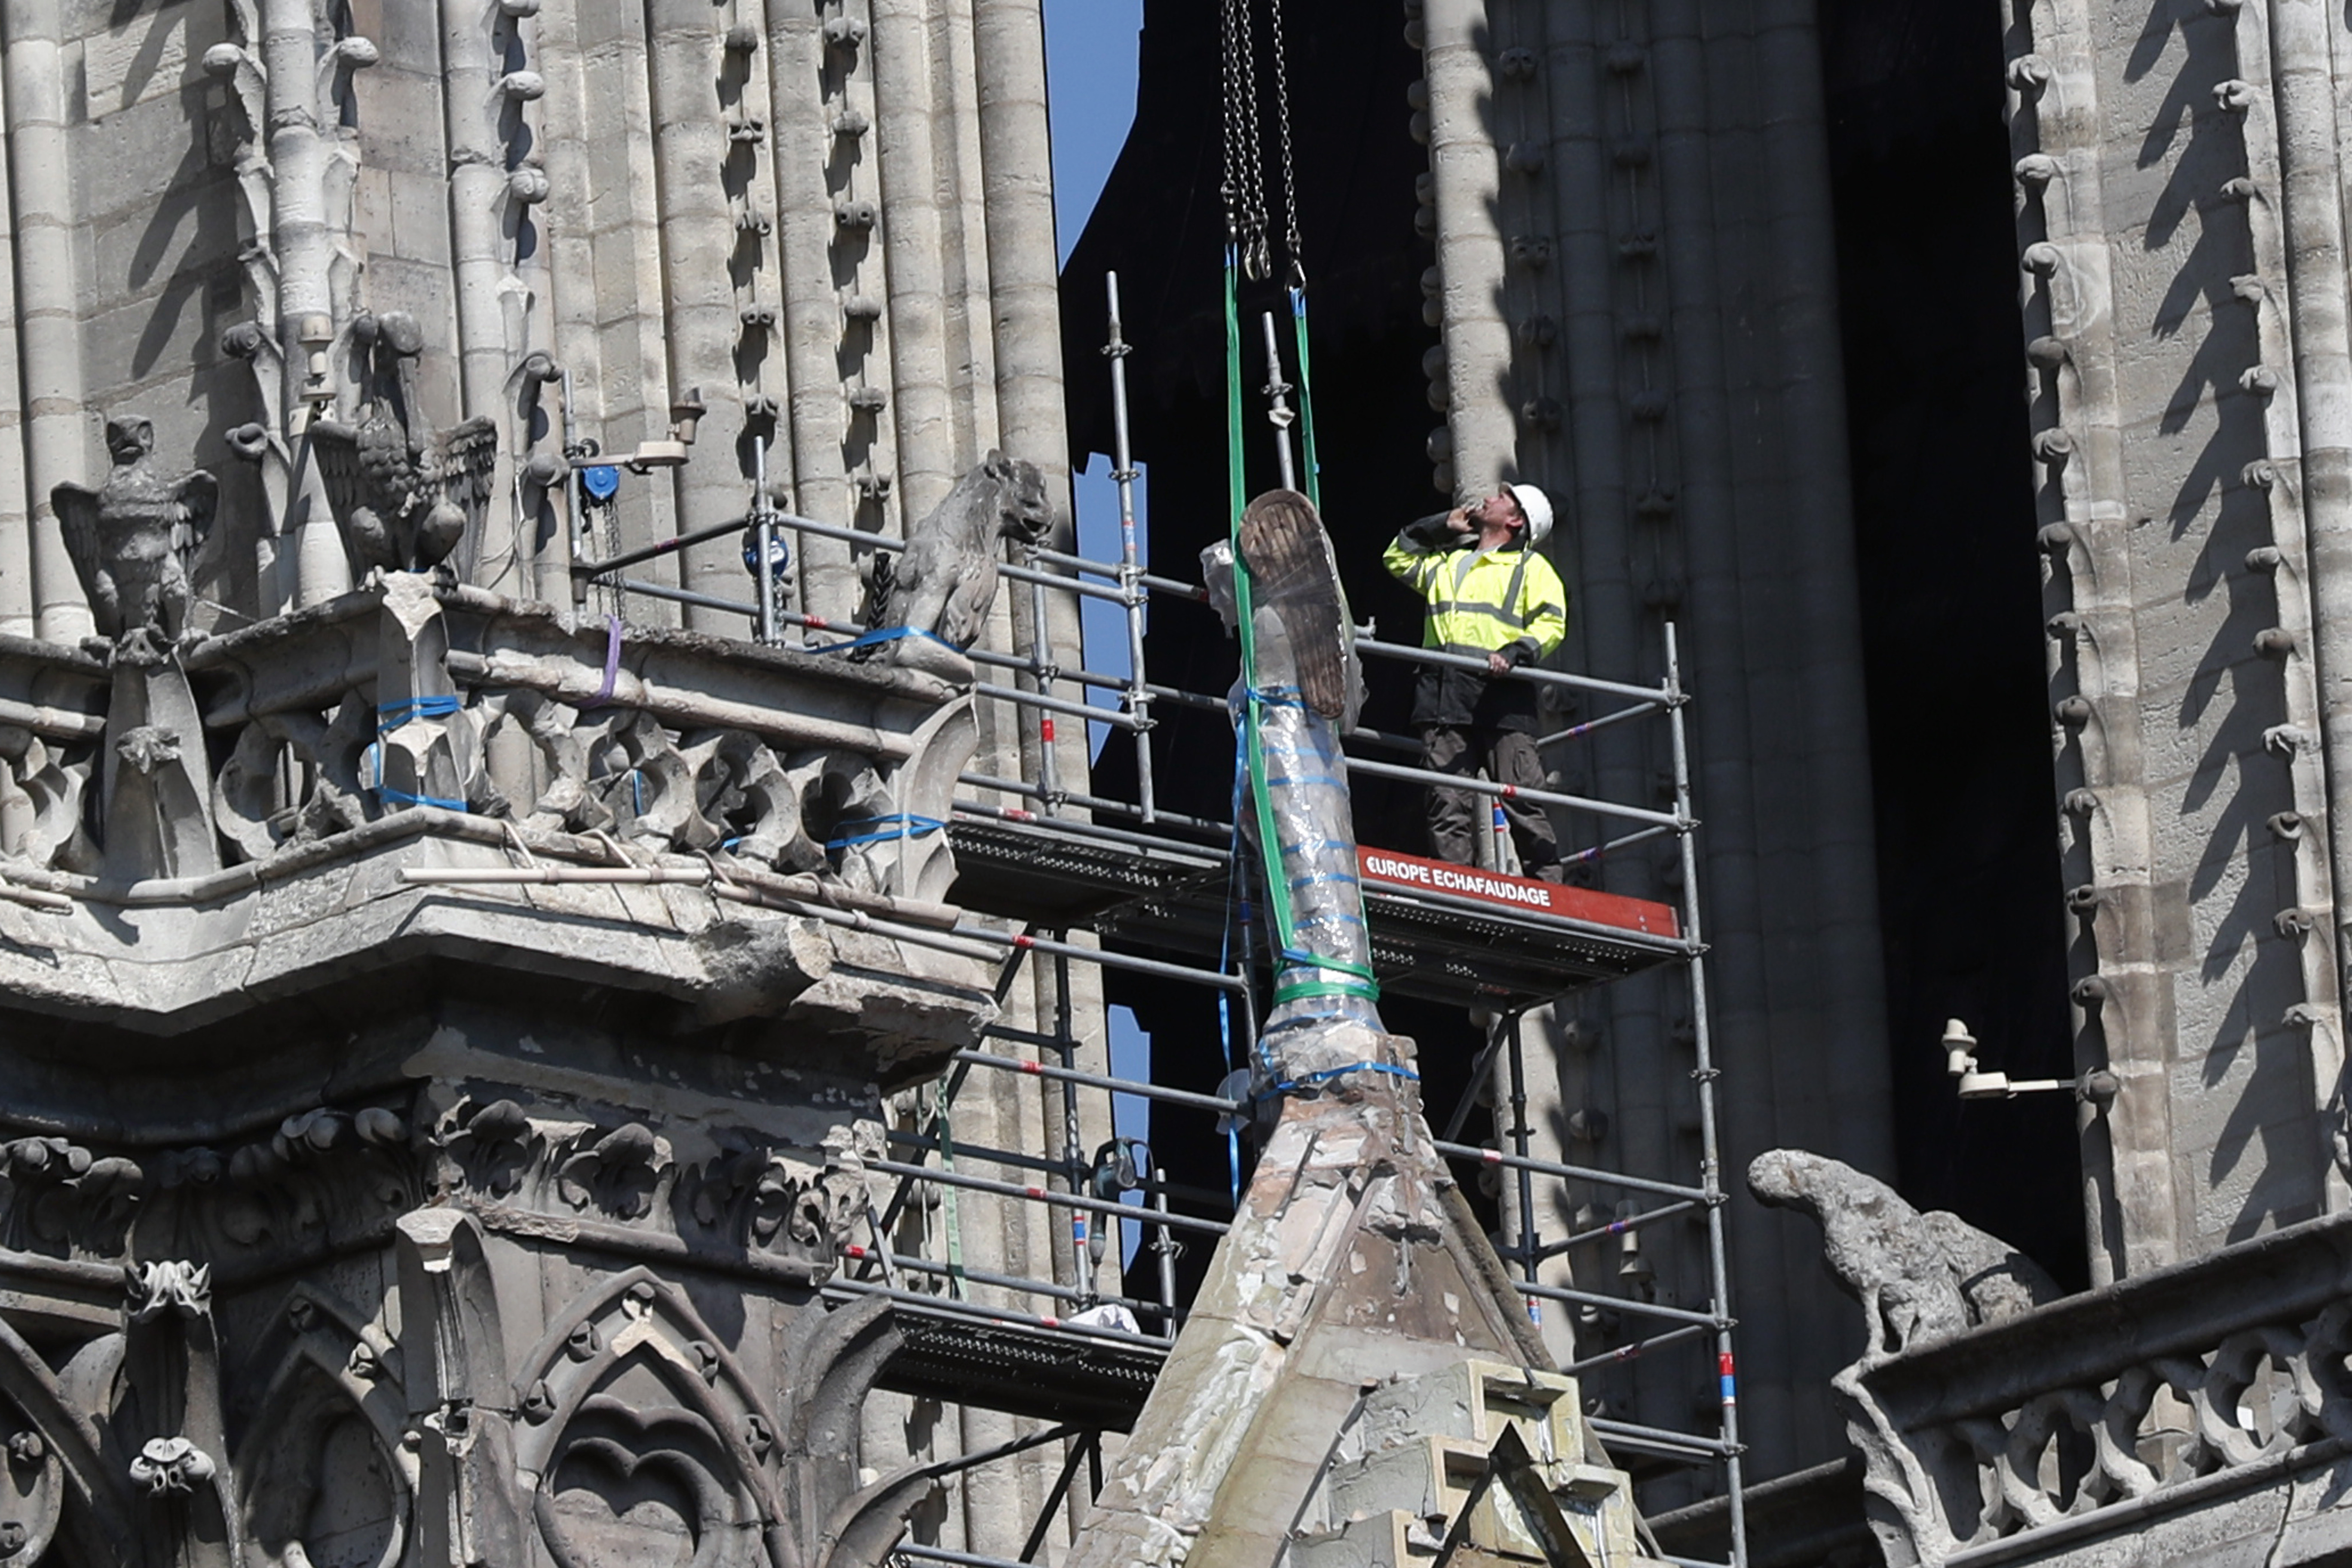 A worker prepares to remove a statue from the damaged Notre Dame cathedral, in Paris, Friday, April 19, 2019. Rebuilding Notre Dame, the 800-year-old Paris cathedral devastated by fire this week, will cost billions of dollars as architects, historians and artisans work to preserve the medieval landmark. (AP Photo/Thibault Camus)